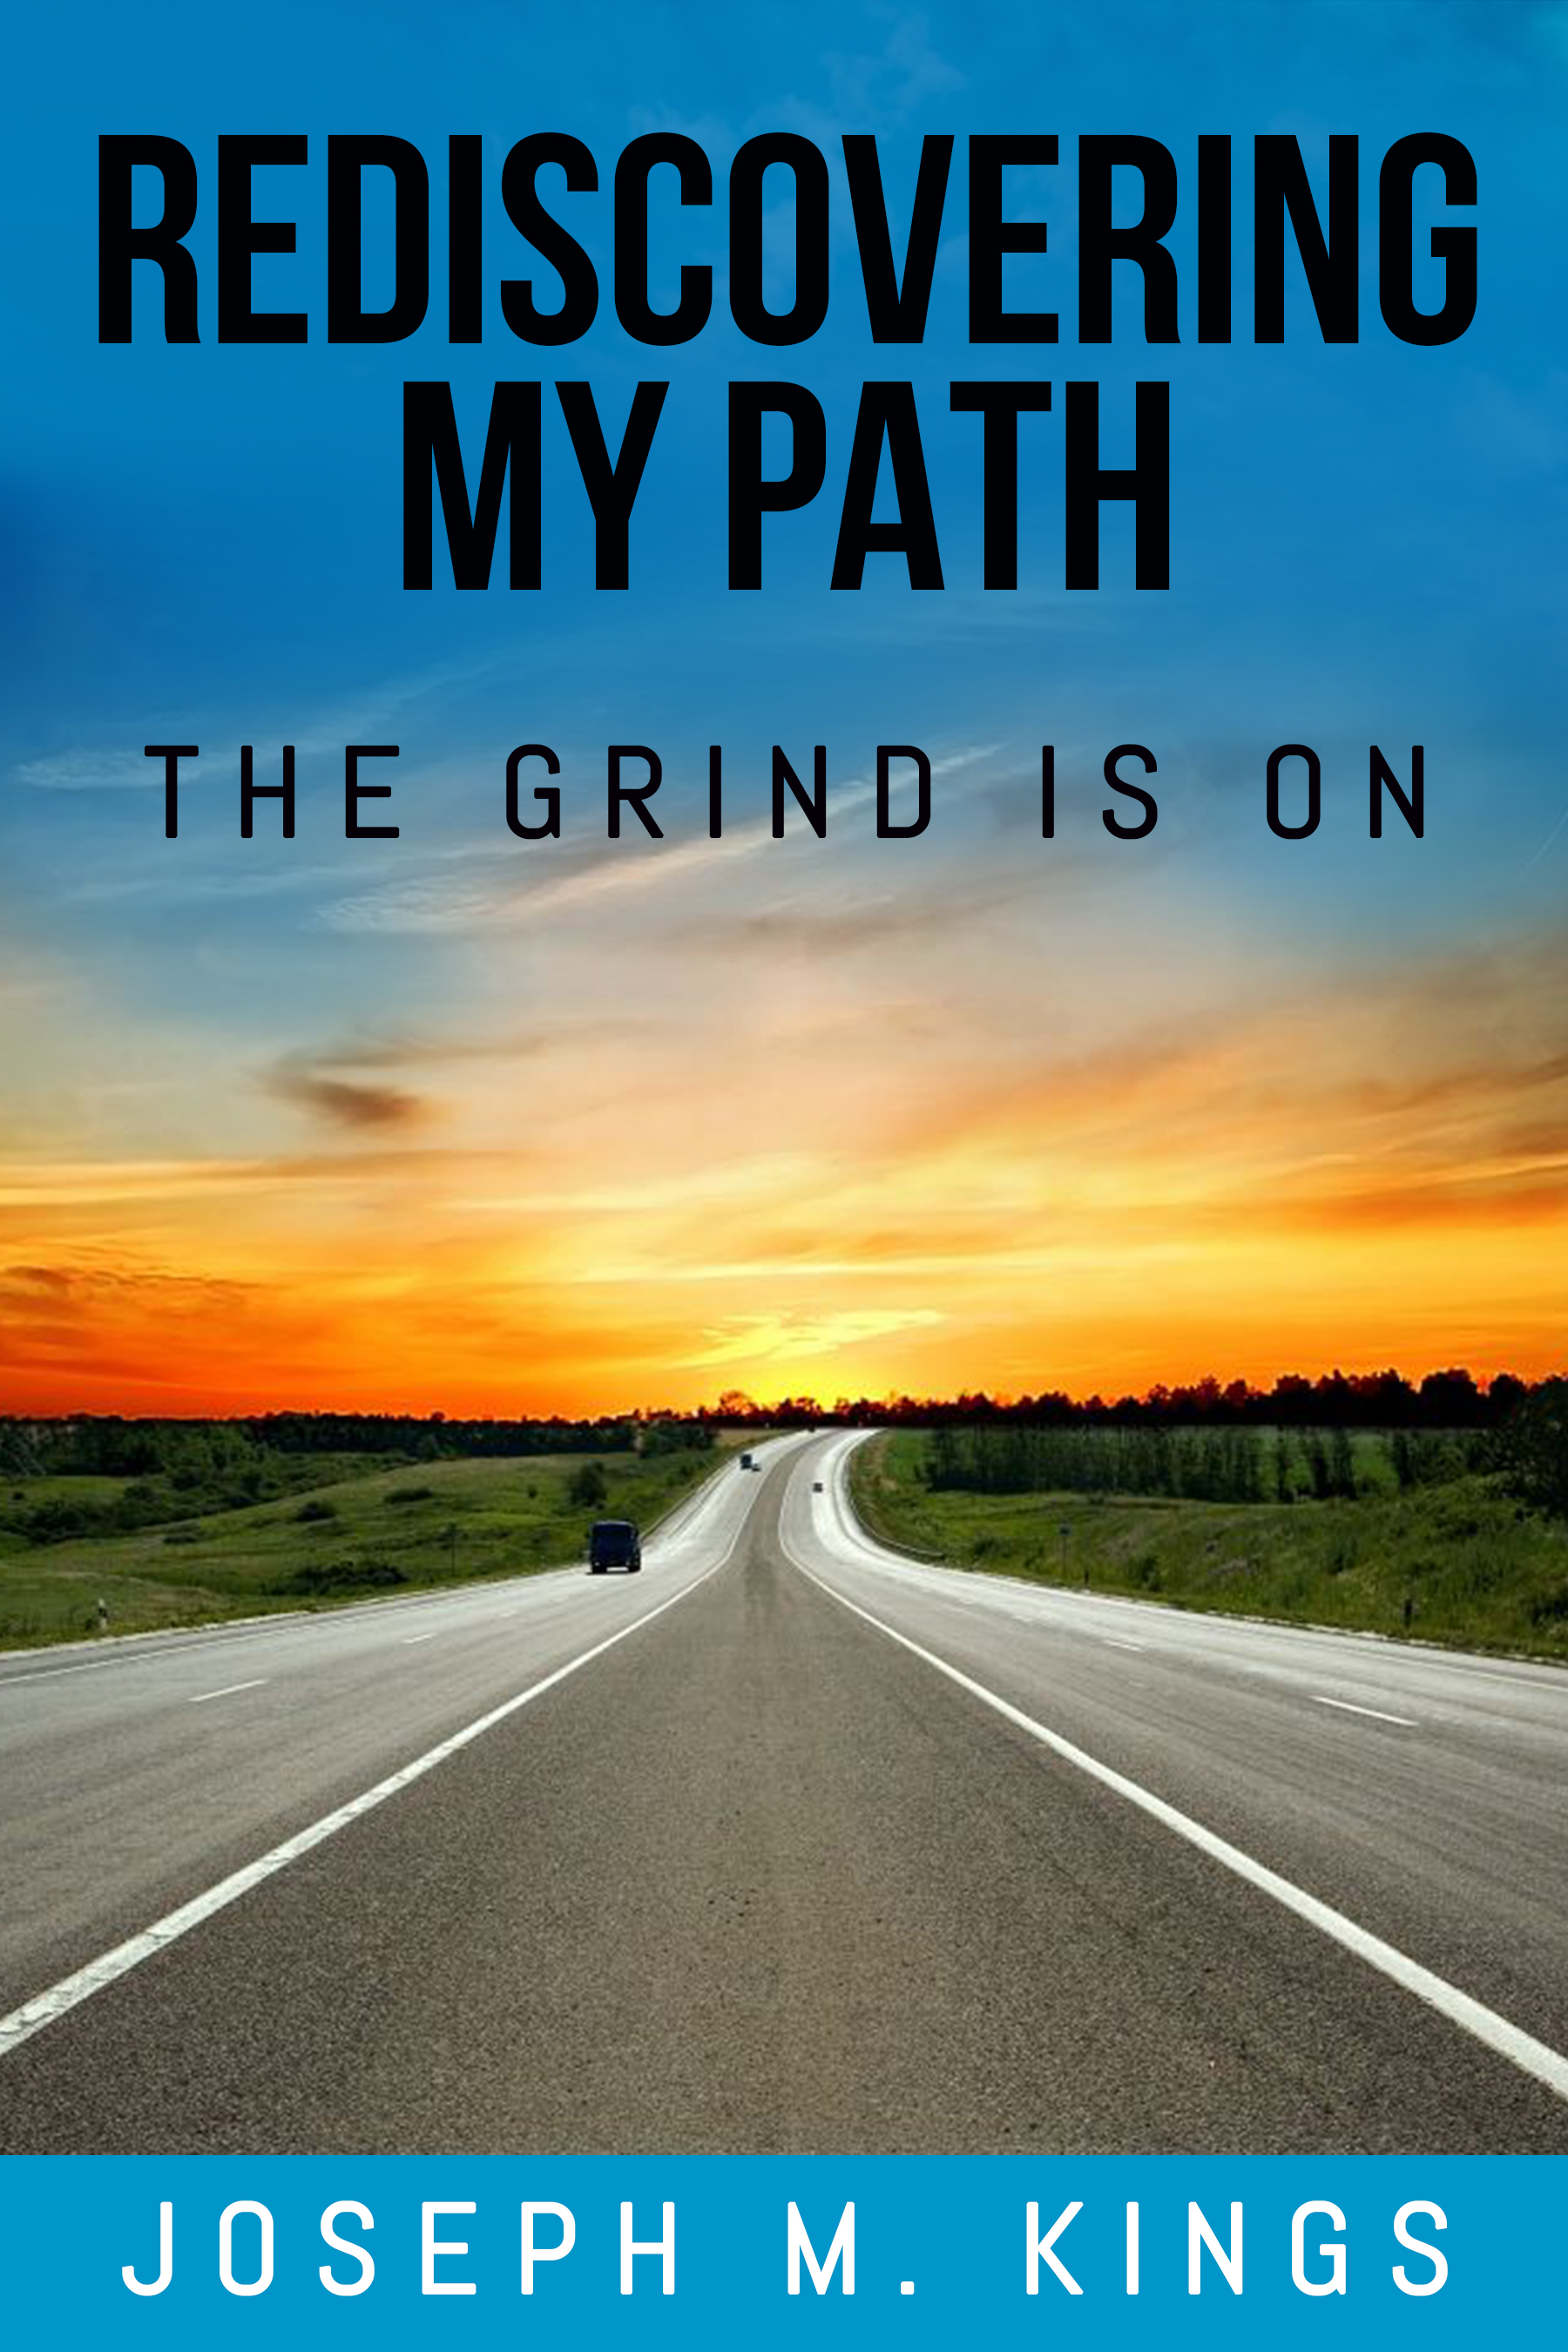 Rediscovering My Path: The Grind is on